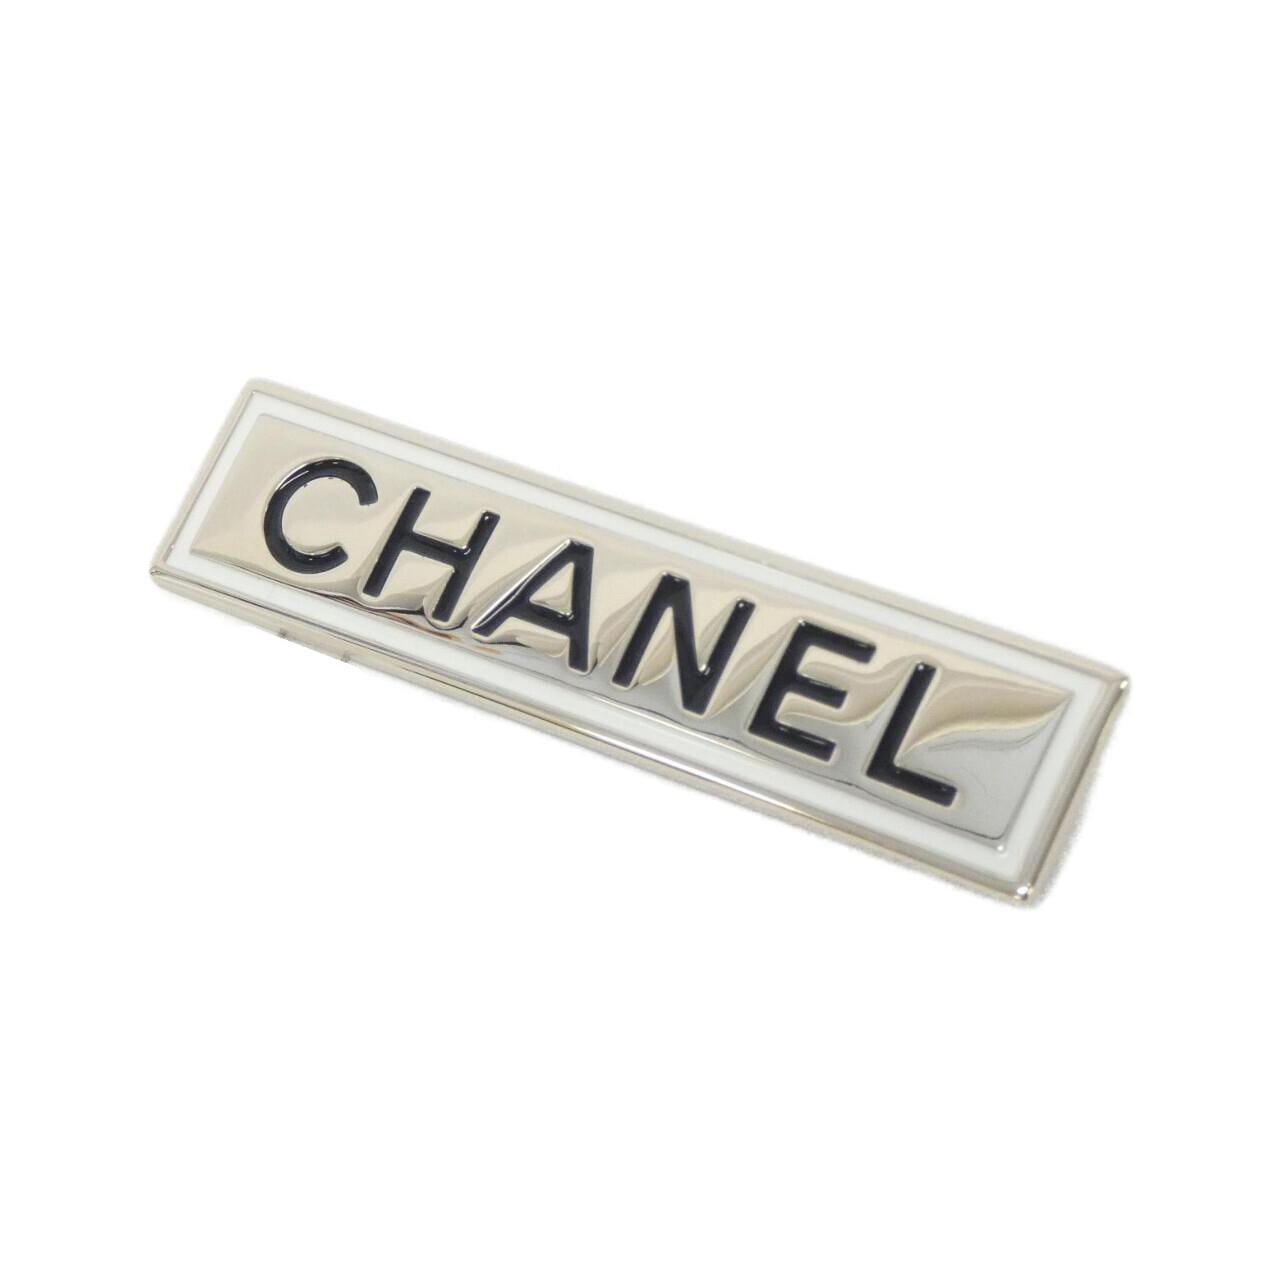 CHANEL AB6773 胸針